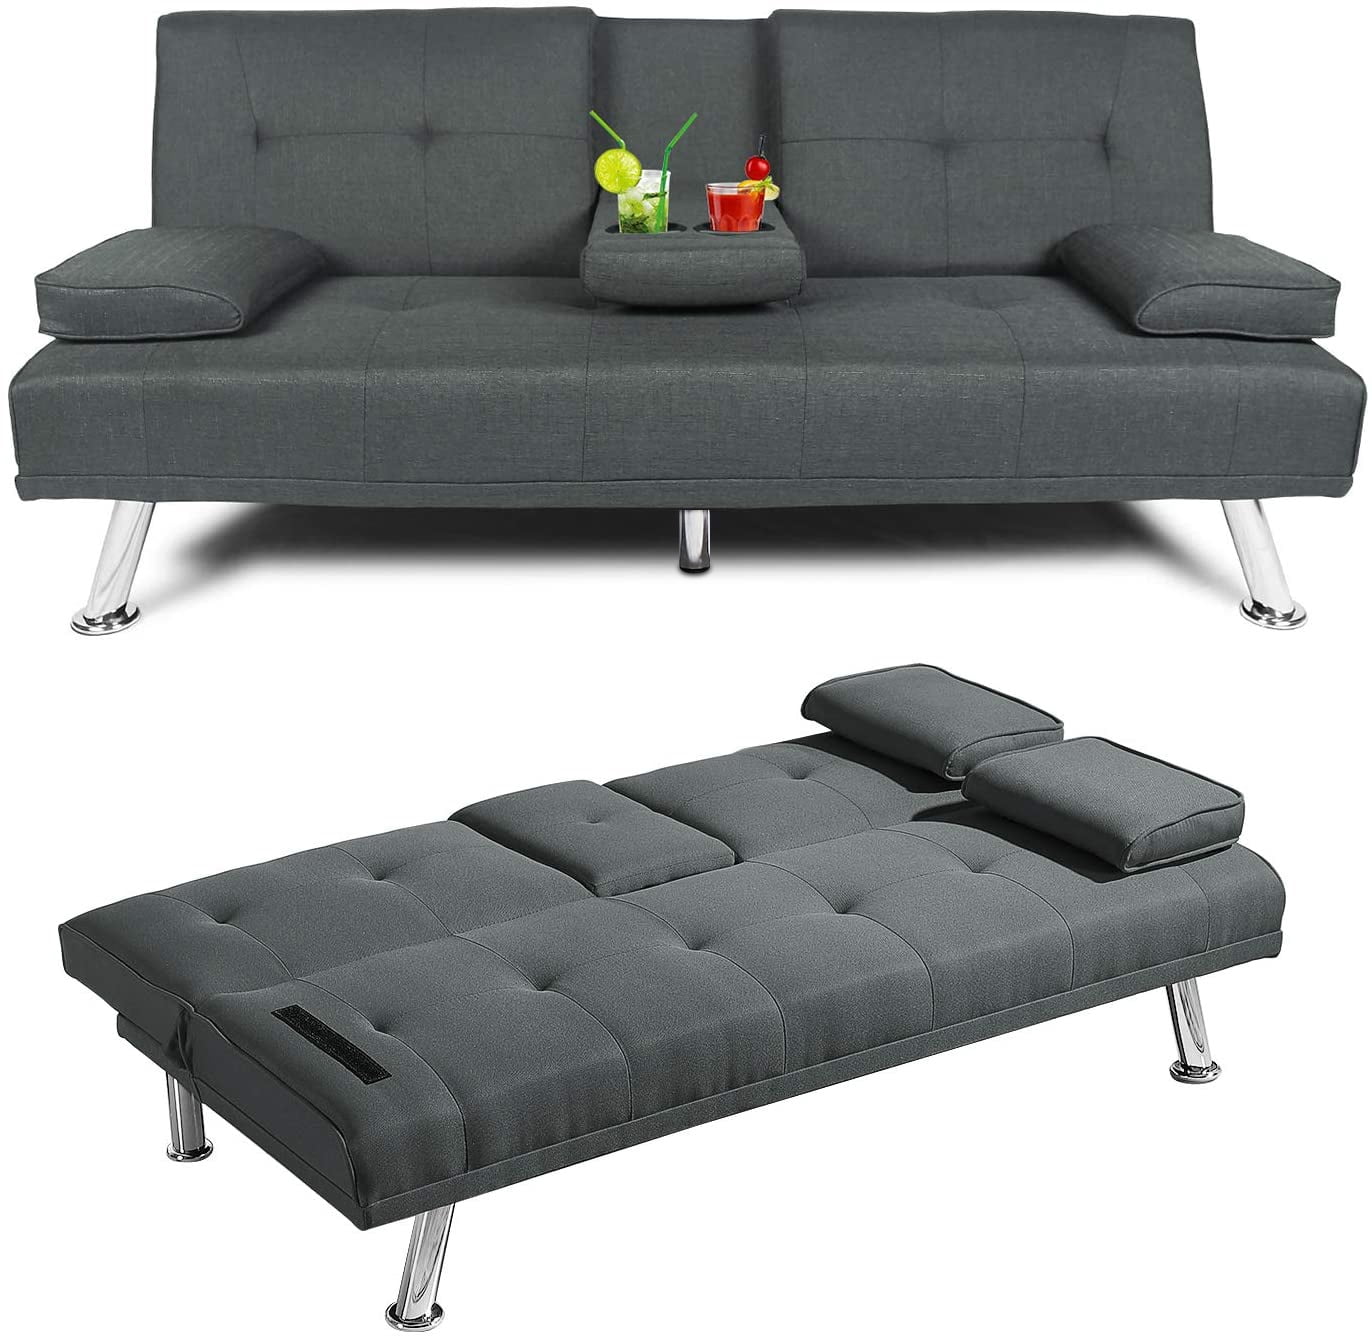 Gray Details about   FUTON SOFA BED Convertible Couch Lounger Modern Living Room Sleep Loveseat 